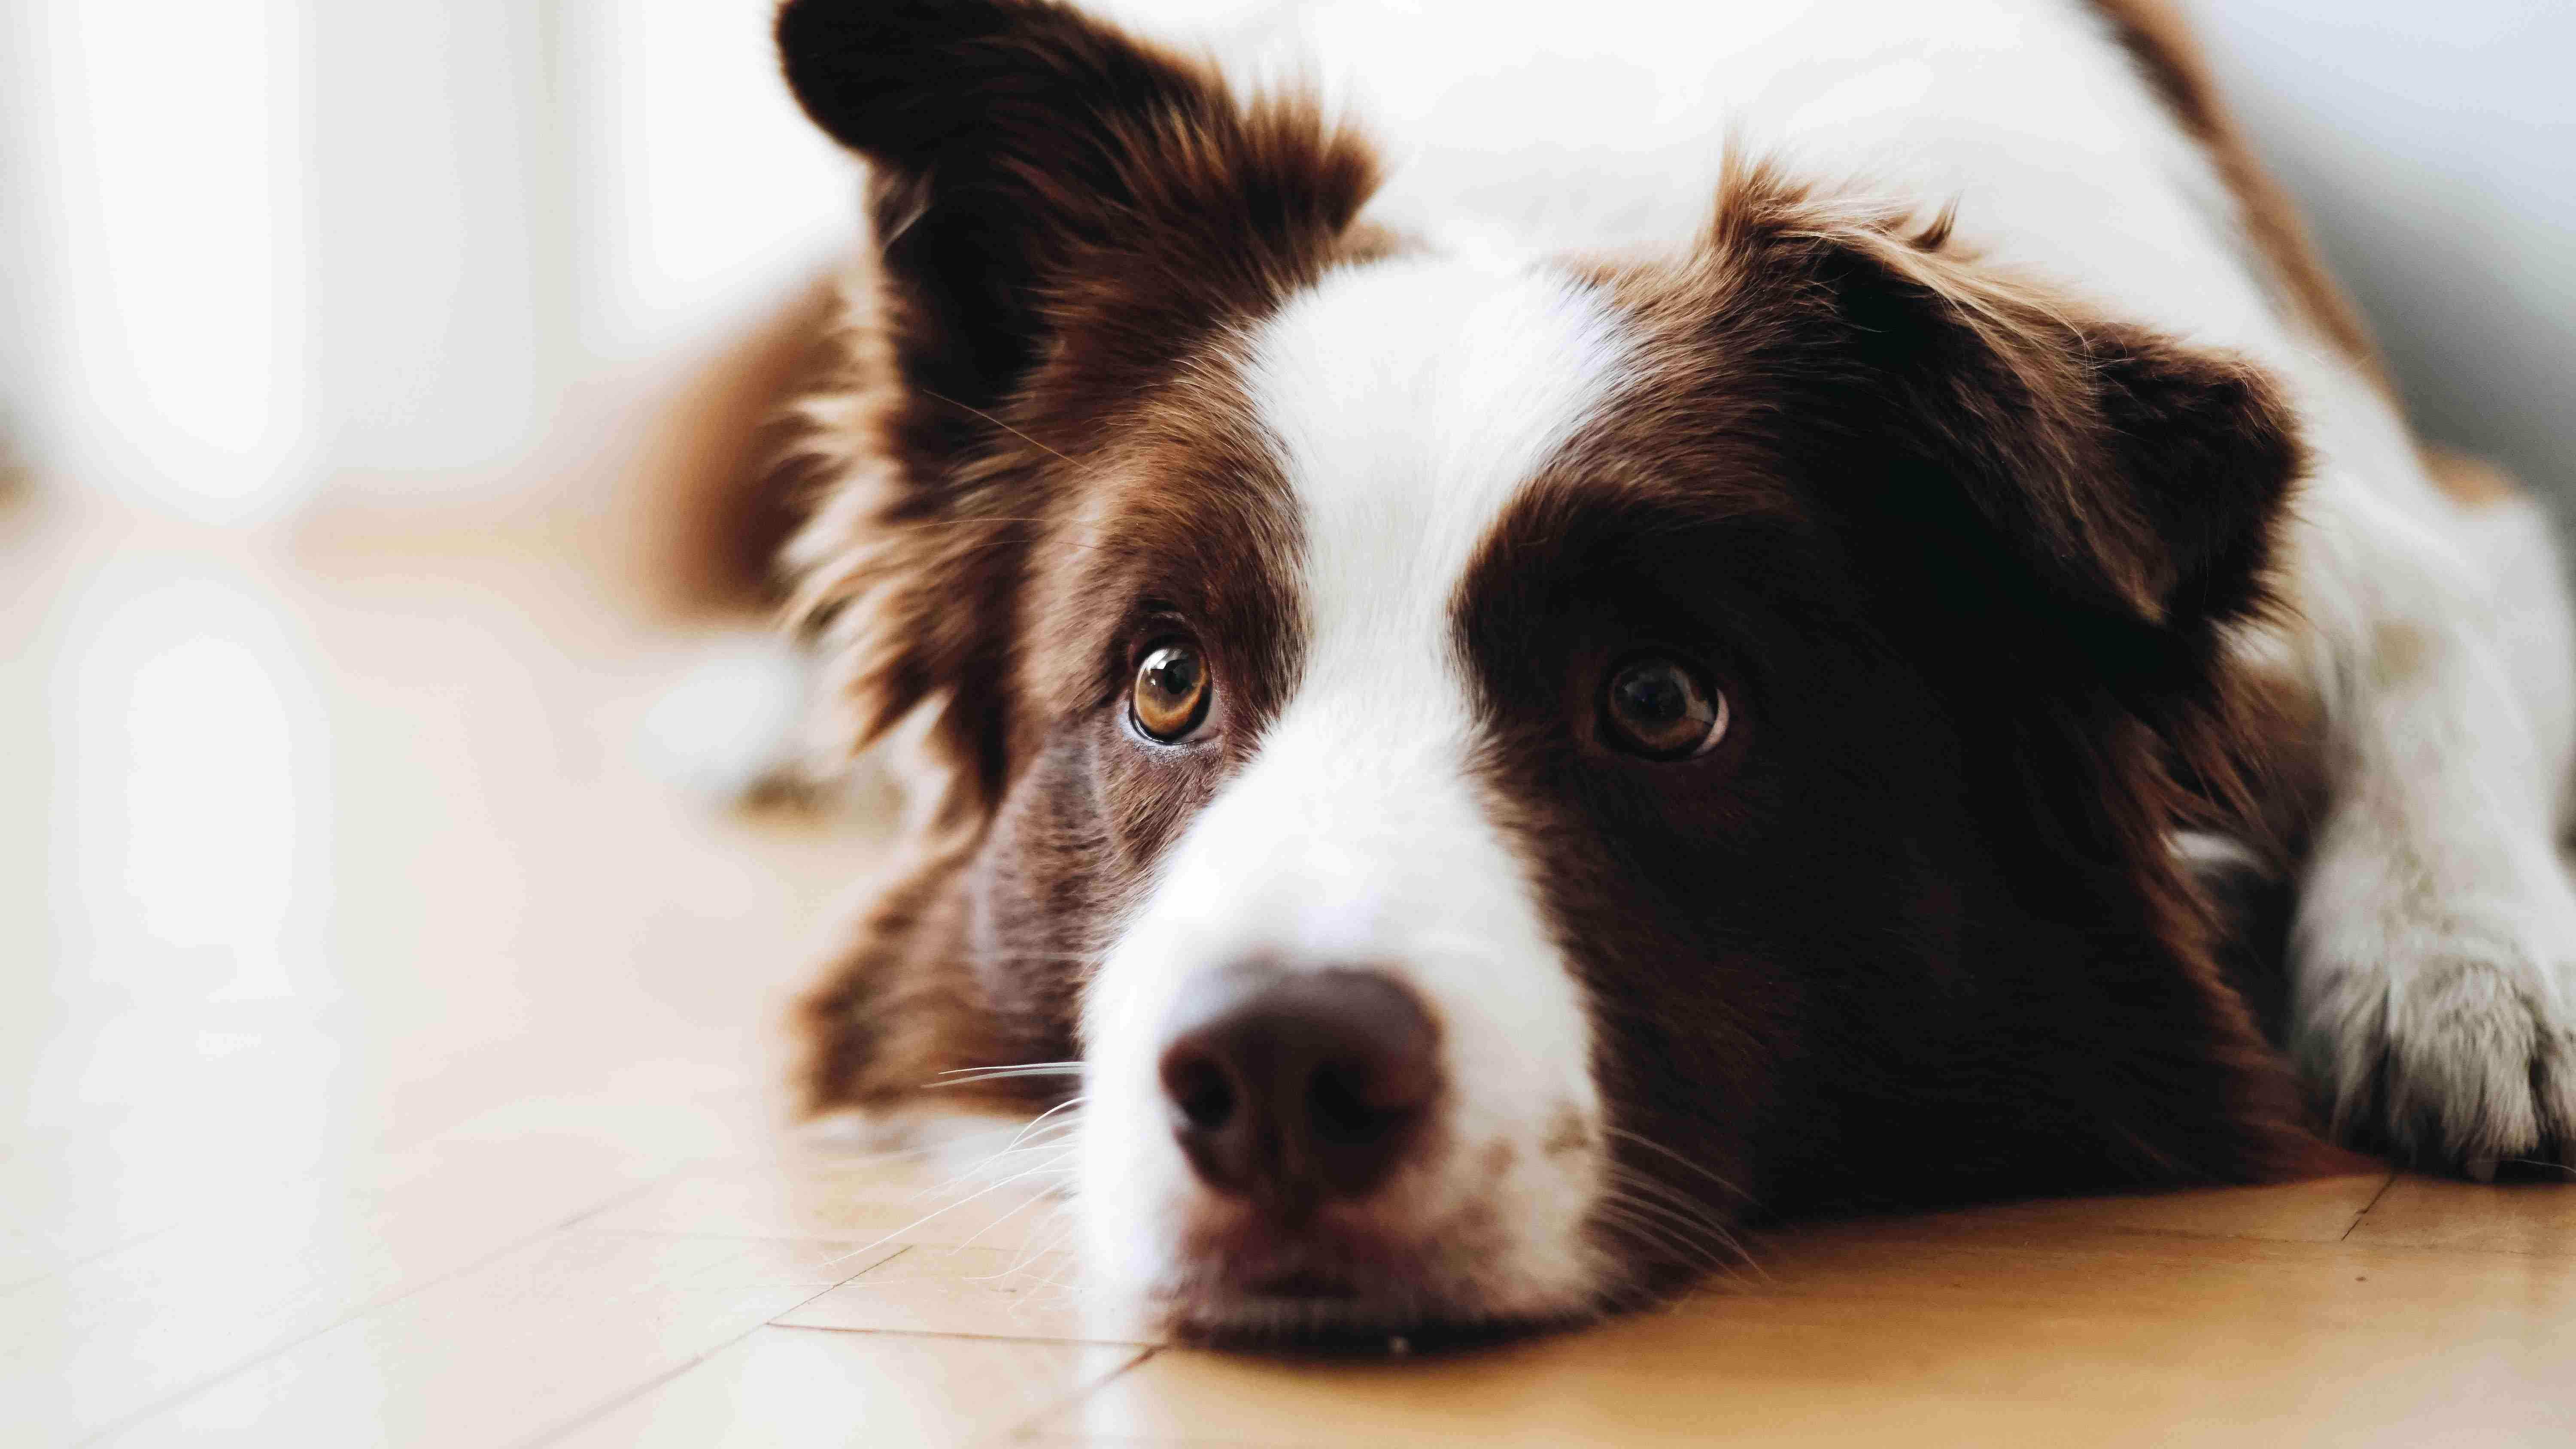 Teaching Your Border Collie to Track Scents and Find Hidden Objects: A Step-by-Step Guide